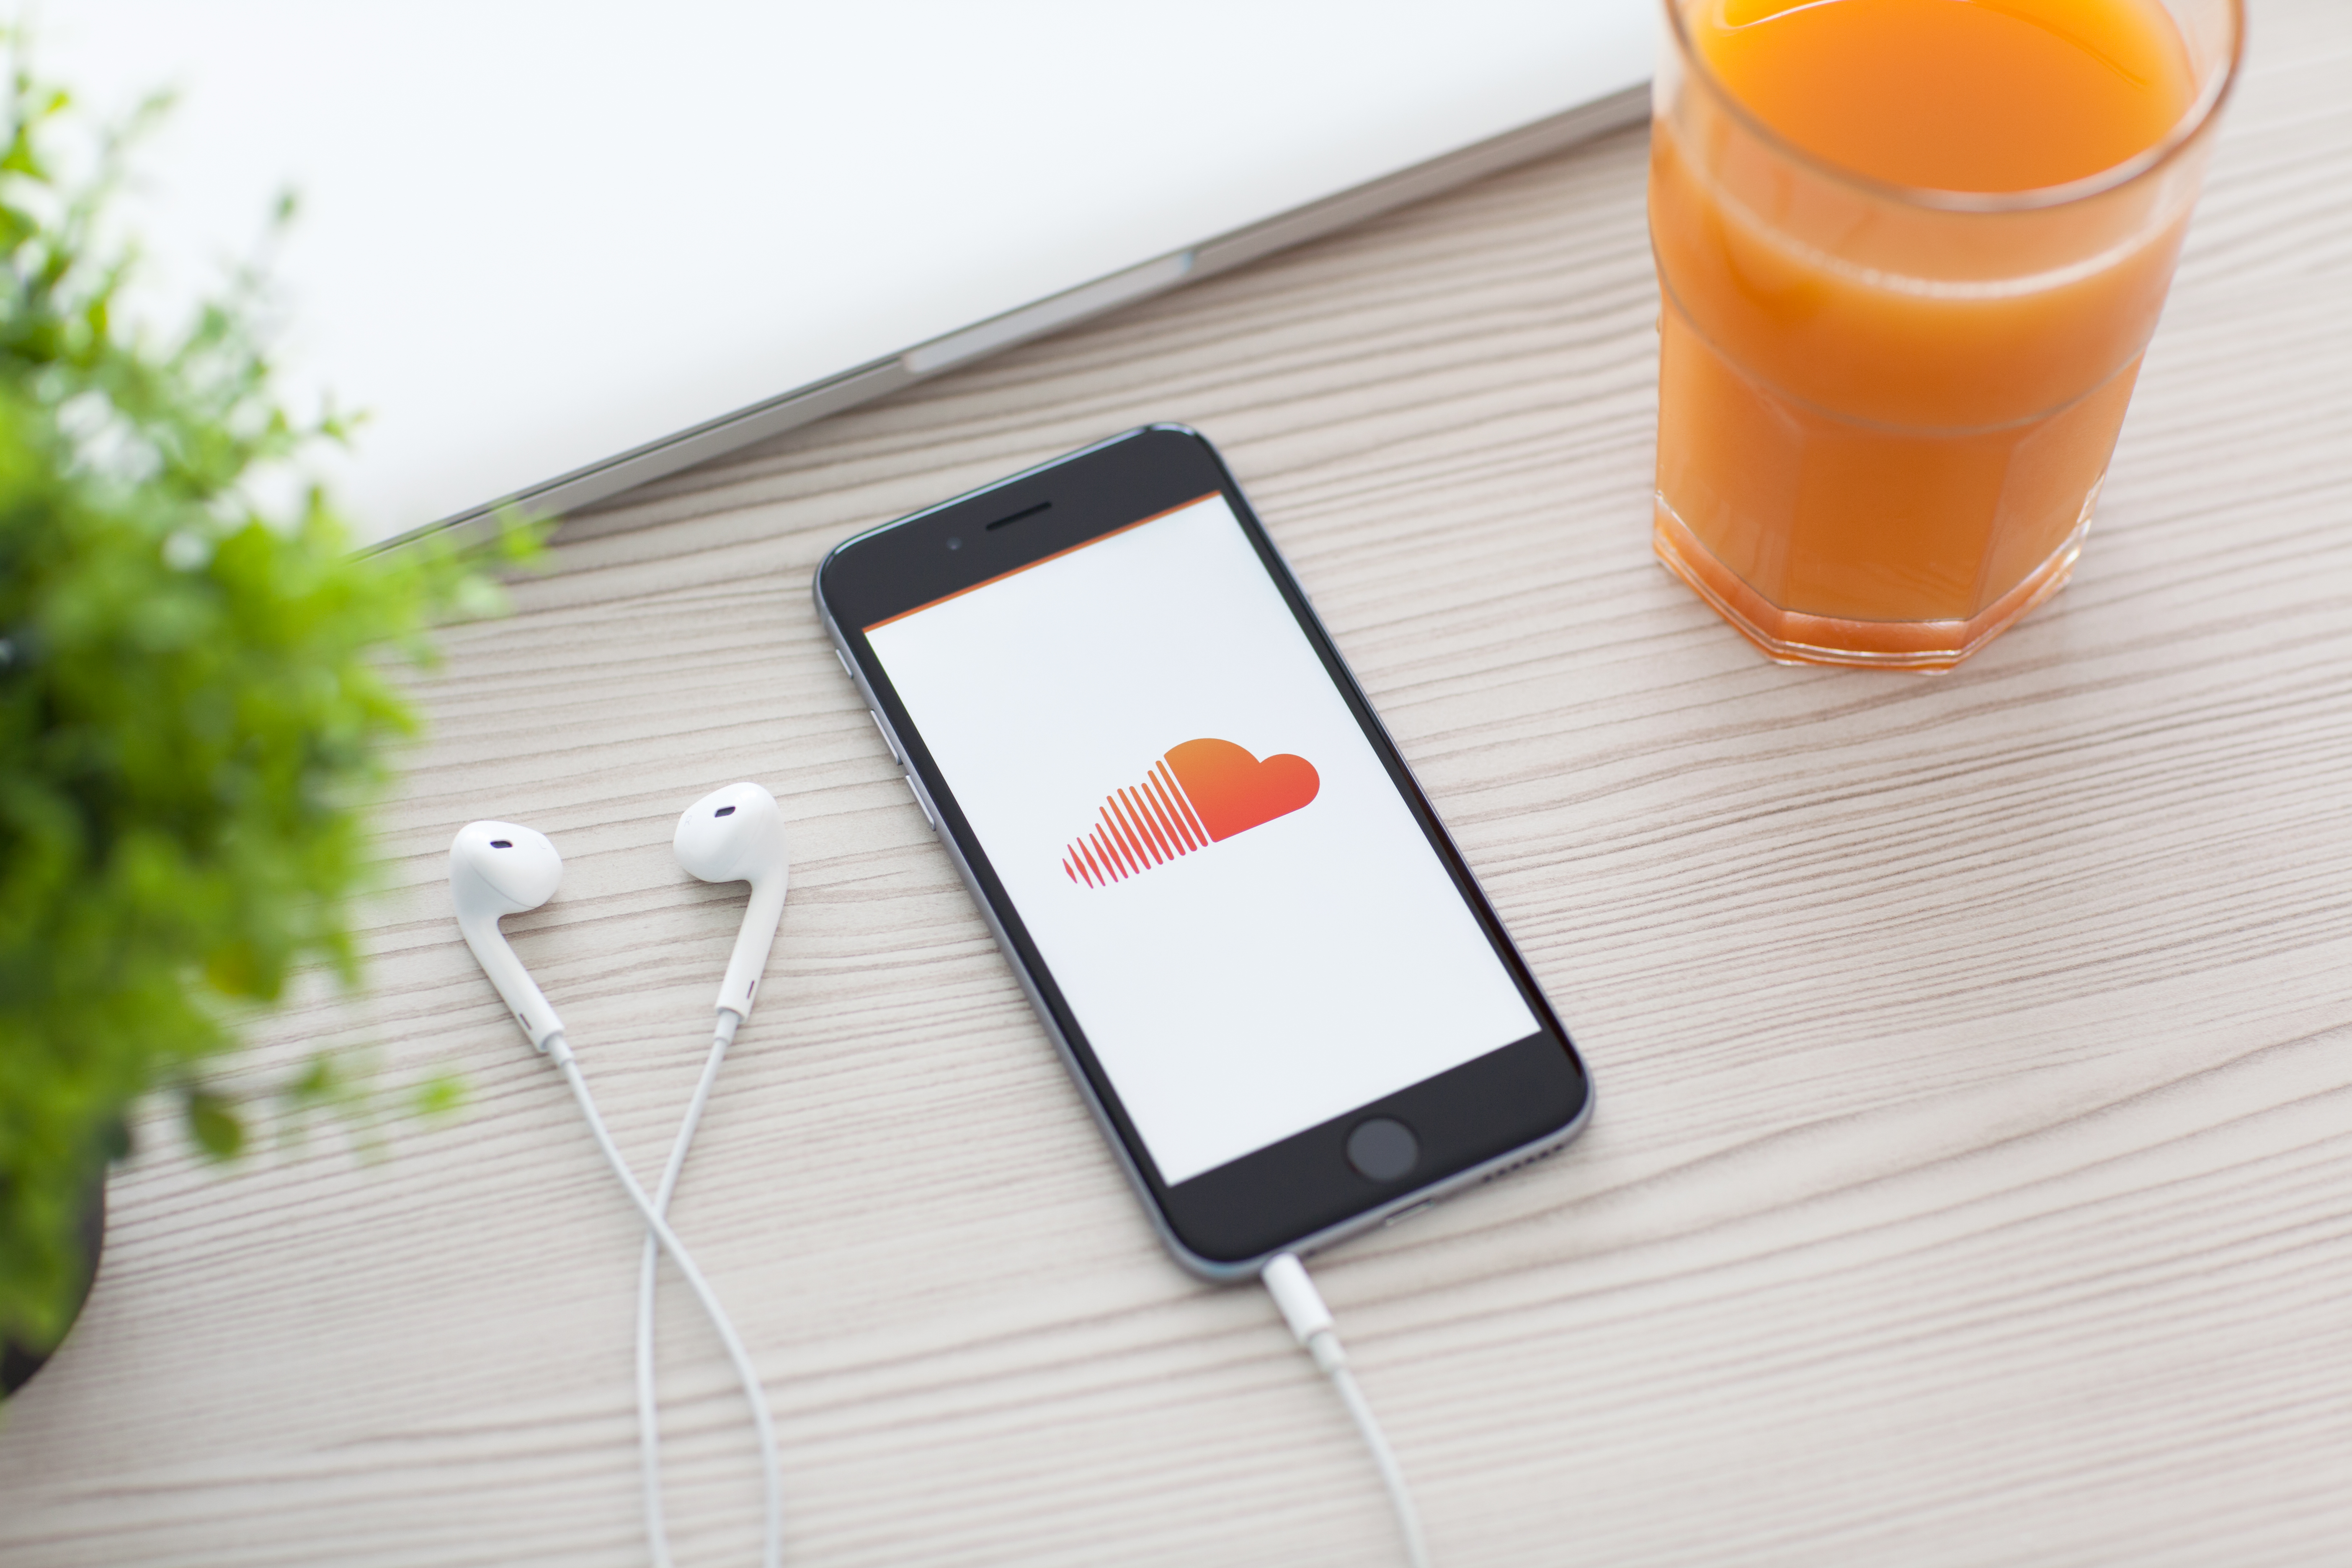 SoundCloud Cuts Subscription Prices to $4.99 a Month